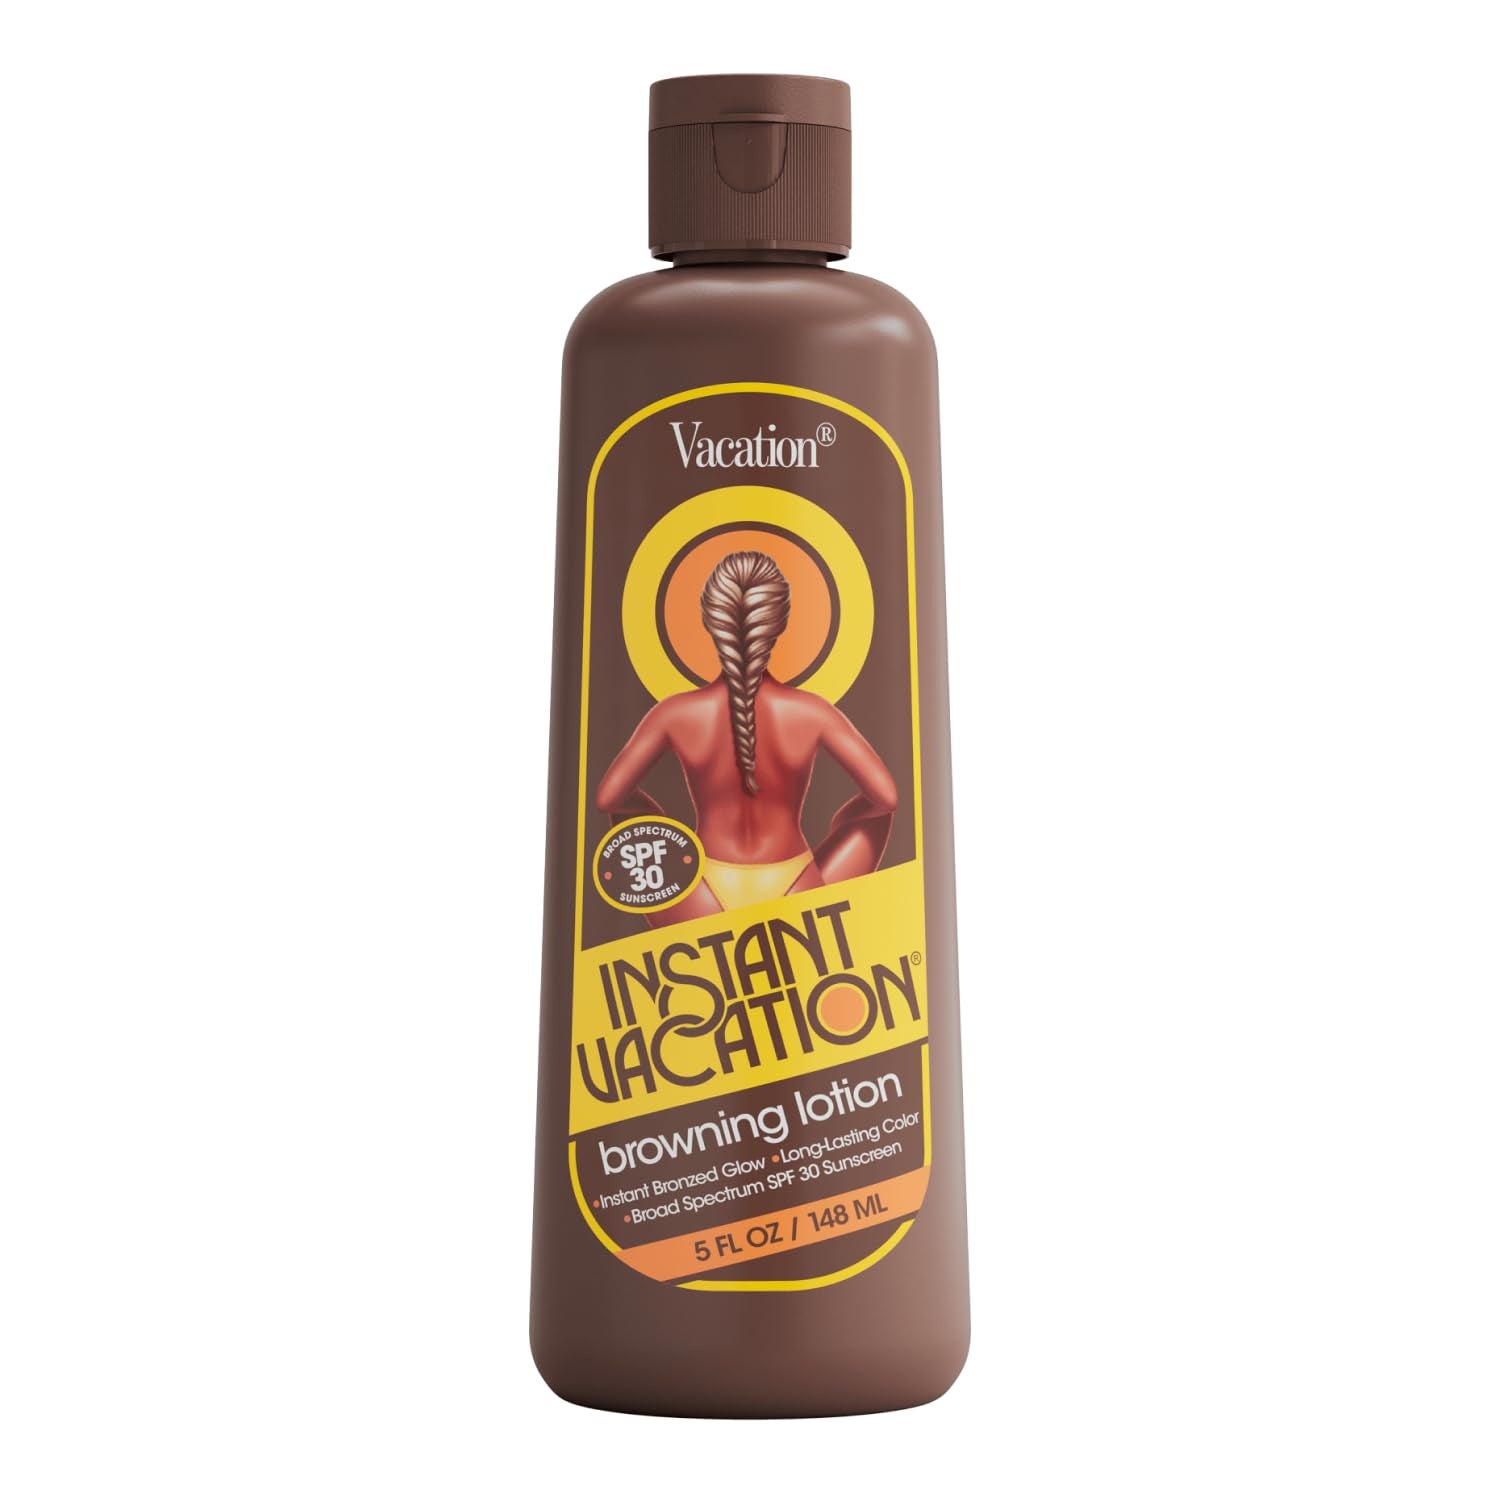 Bottle of Vacation brand Instant Vacation Browning SPF 30 lotion with SPF 30. The bottle is brown and features an illustration of a woman lounging in a yellow circle, reminiscent of the sun.